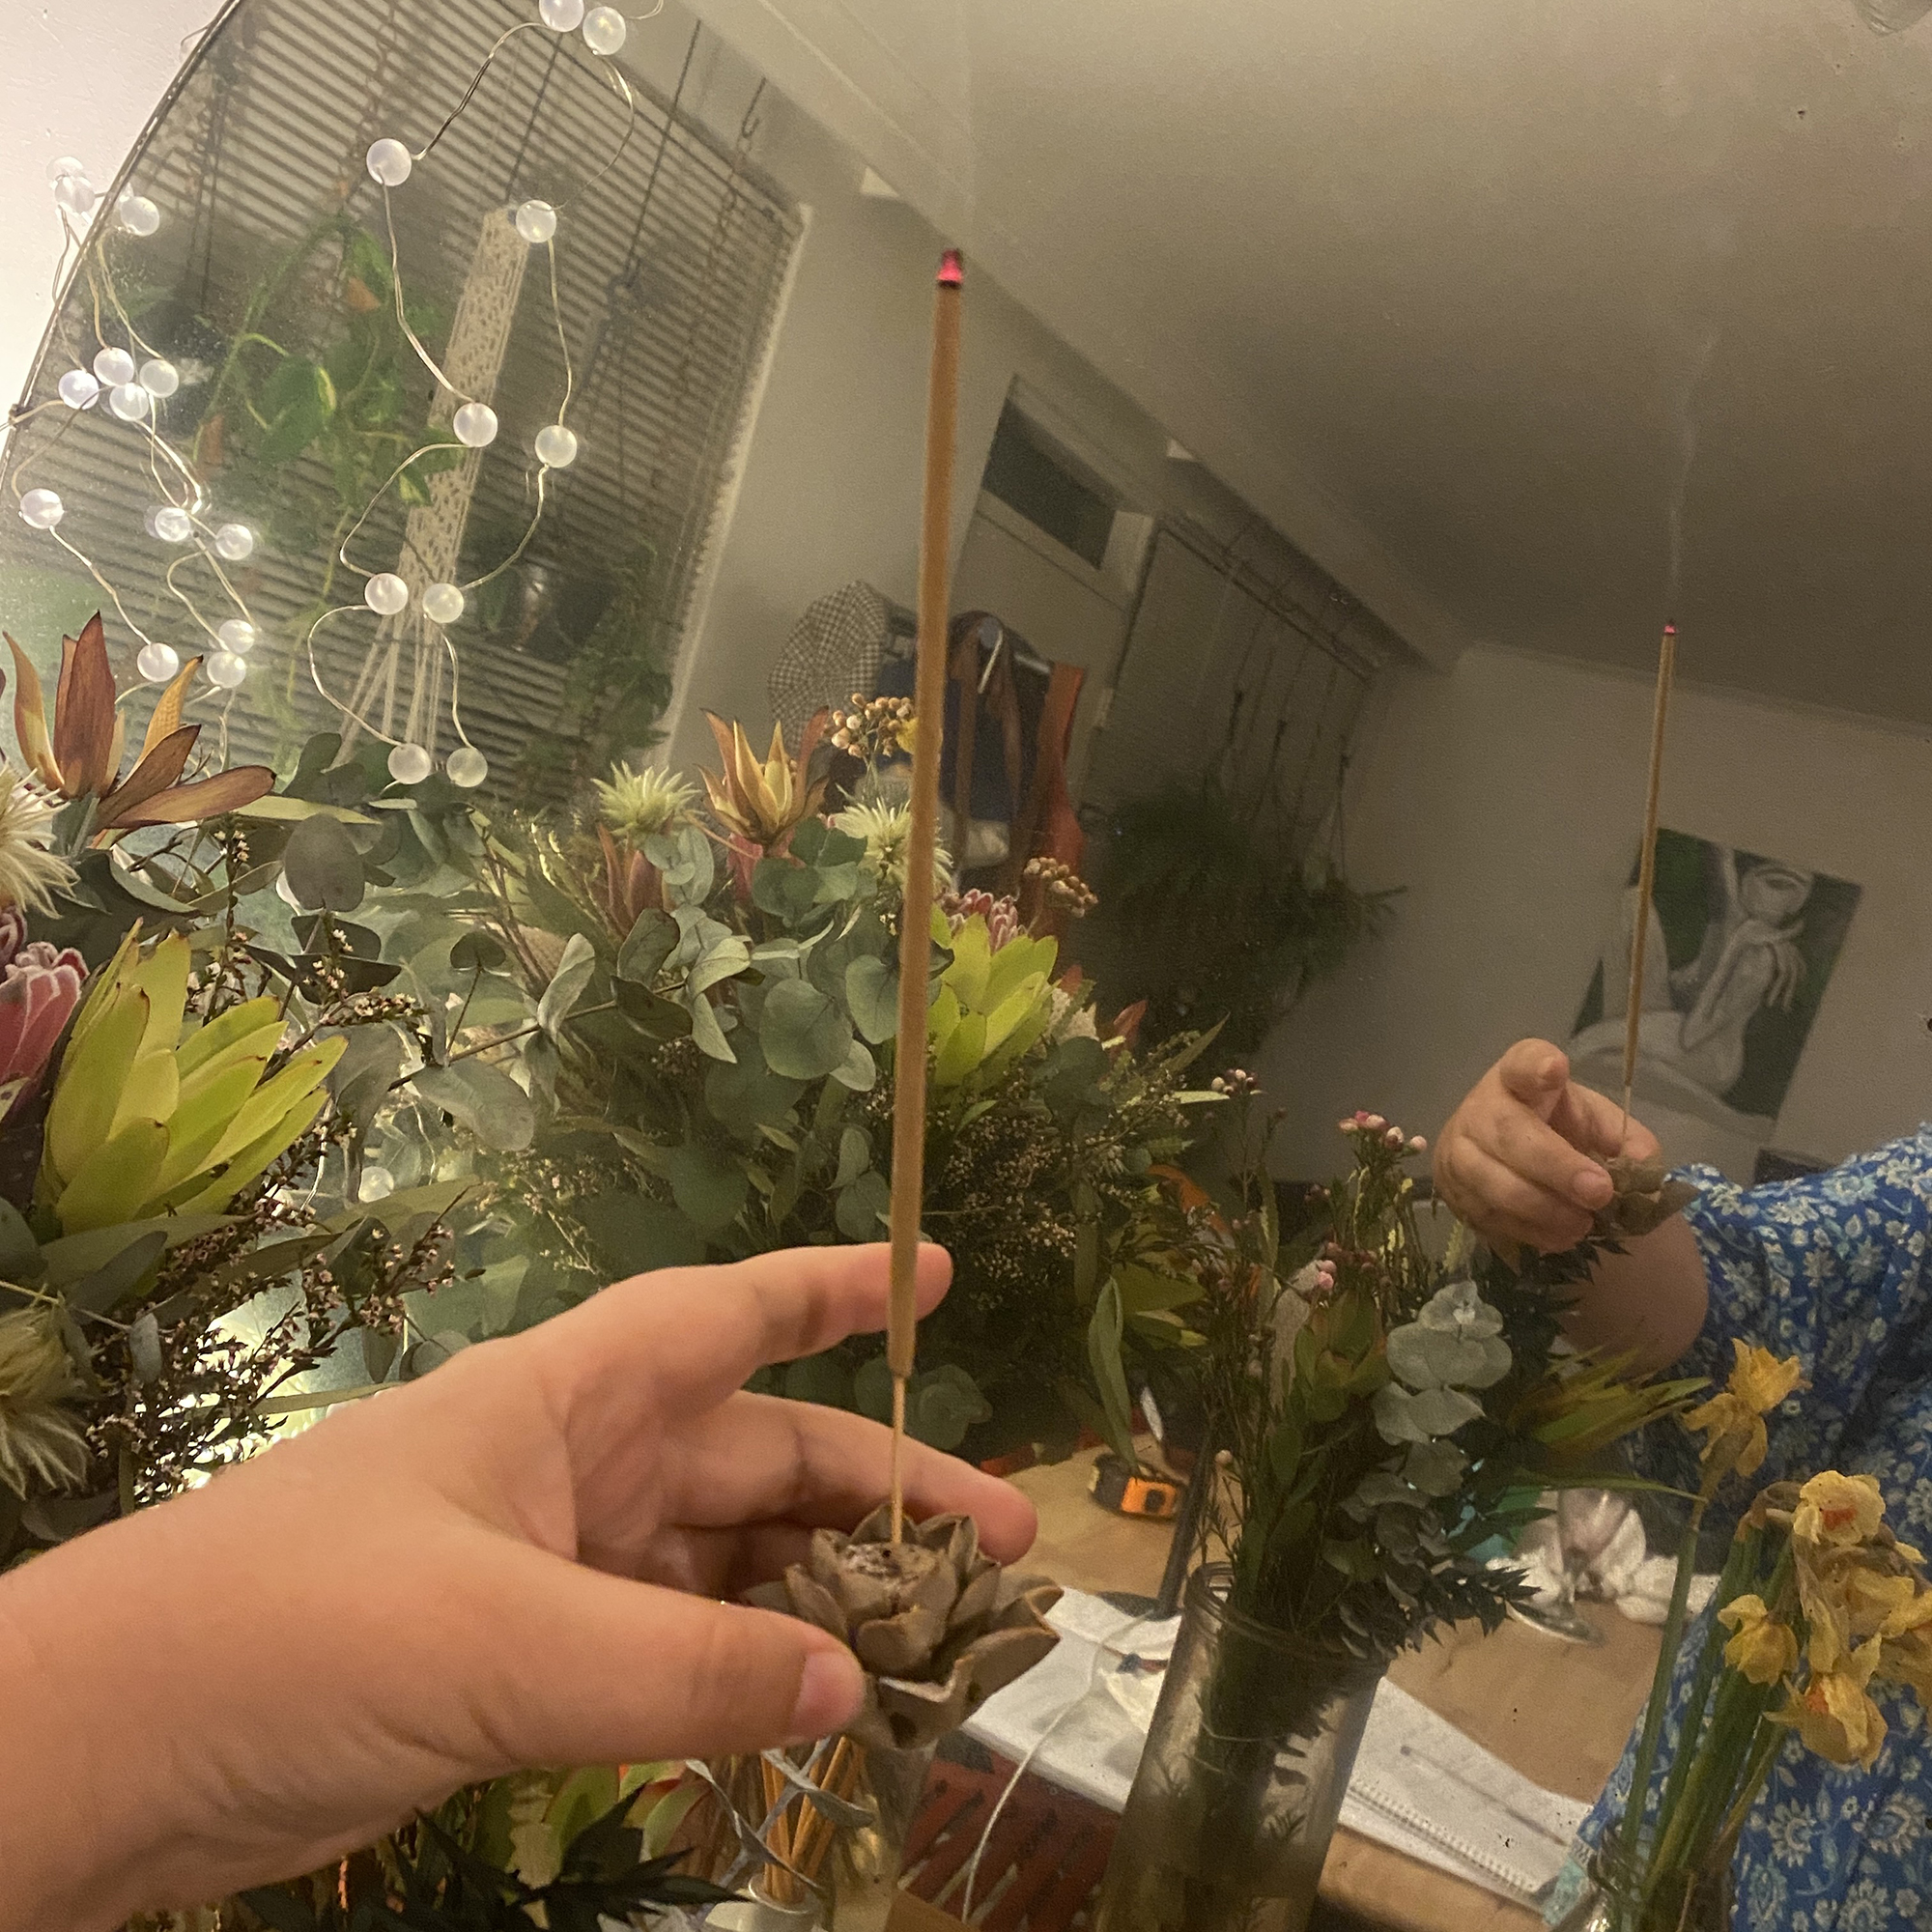 sarah holding incense in front of a mirror and lots of bunches of flowers - you can see the incense smoke in the mirror